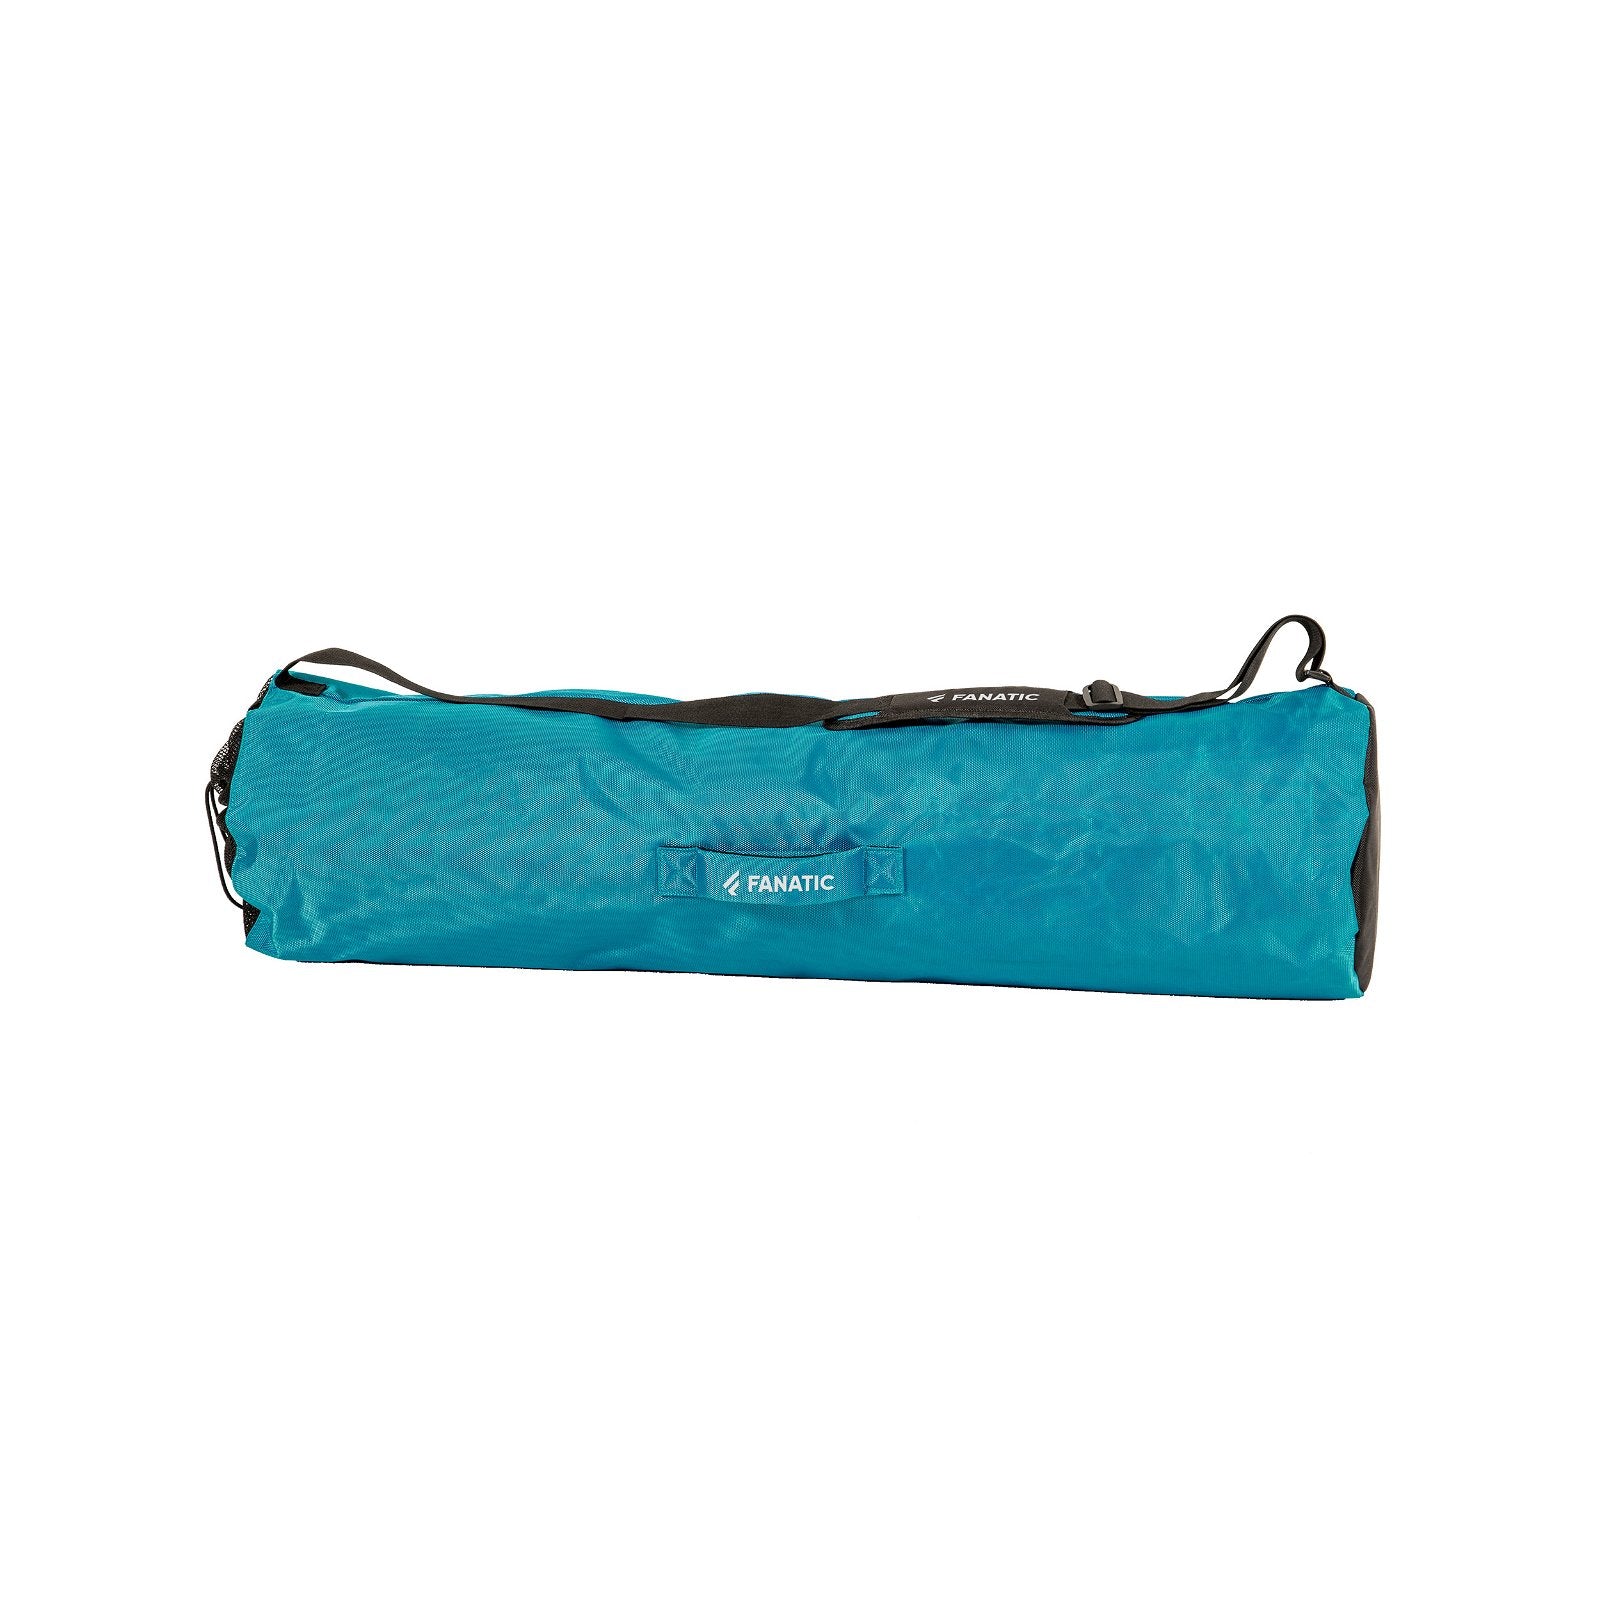 FANATIC Gearbag Air Mat 2024-Fanatic SUP-104x35cm-turquoise-13200-7003-9008415934010-Surf-store.com